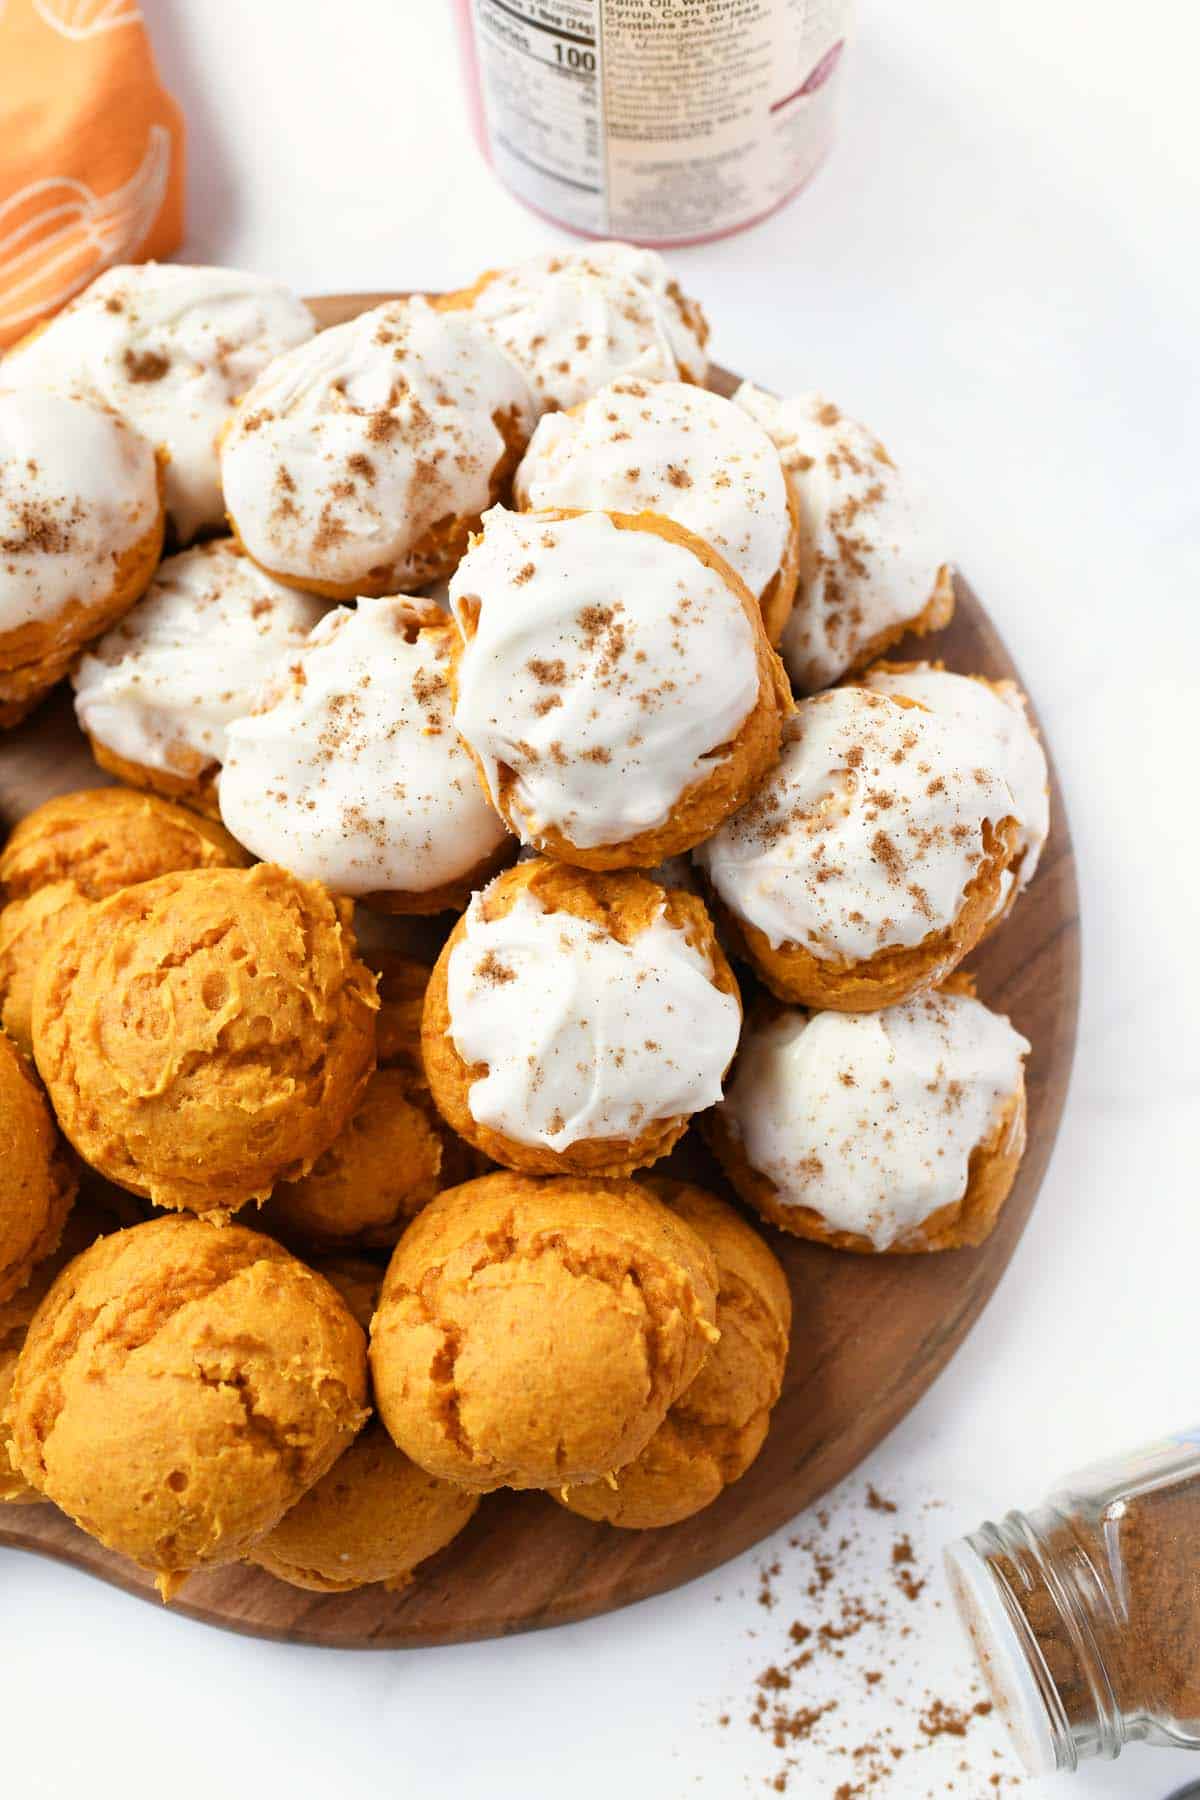 Iced pumpkin cookies on a wooden tray.